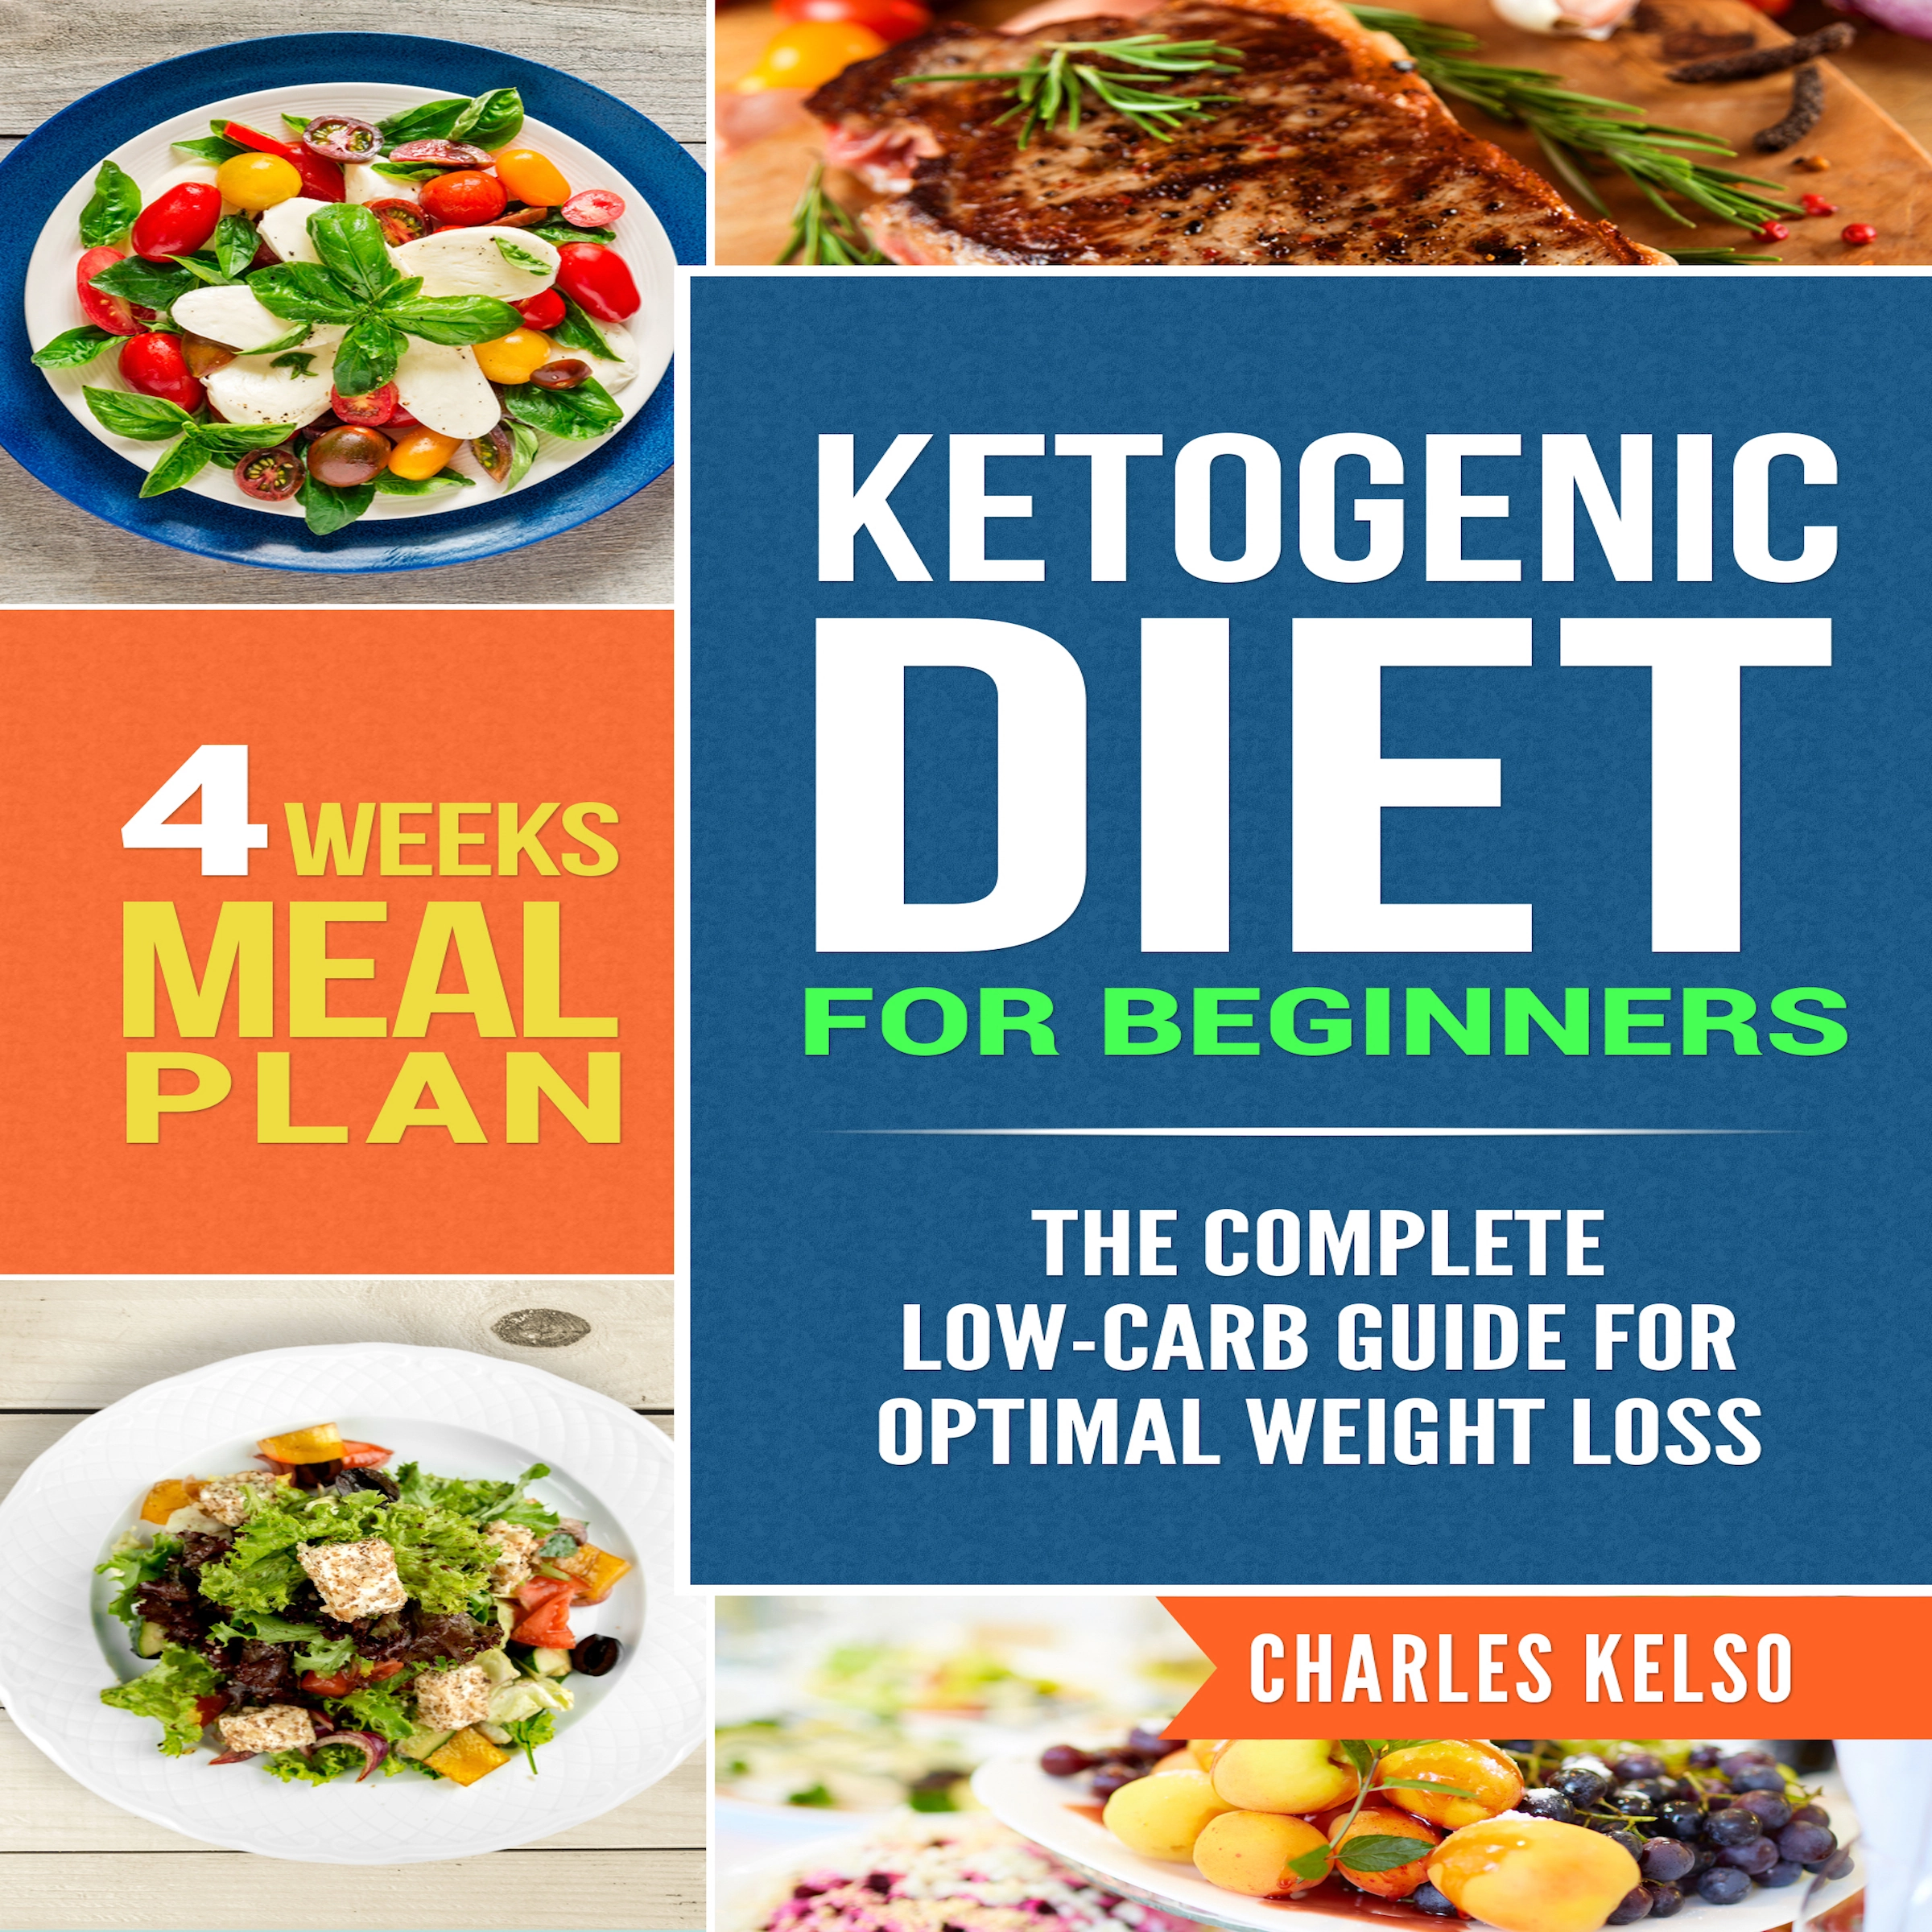 Ketogenic Diet for Beginners: The Complete Low-Carb Guide for Optimal Weight Loss. 4-Weeks Keto Meal Plan. Audiobook by Charles Kelso